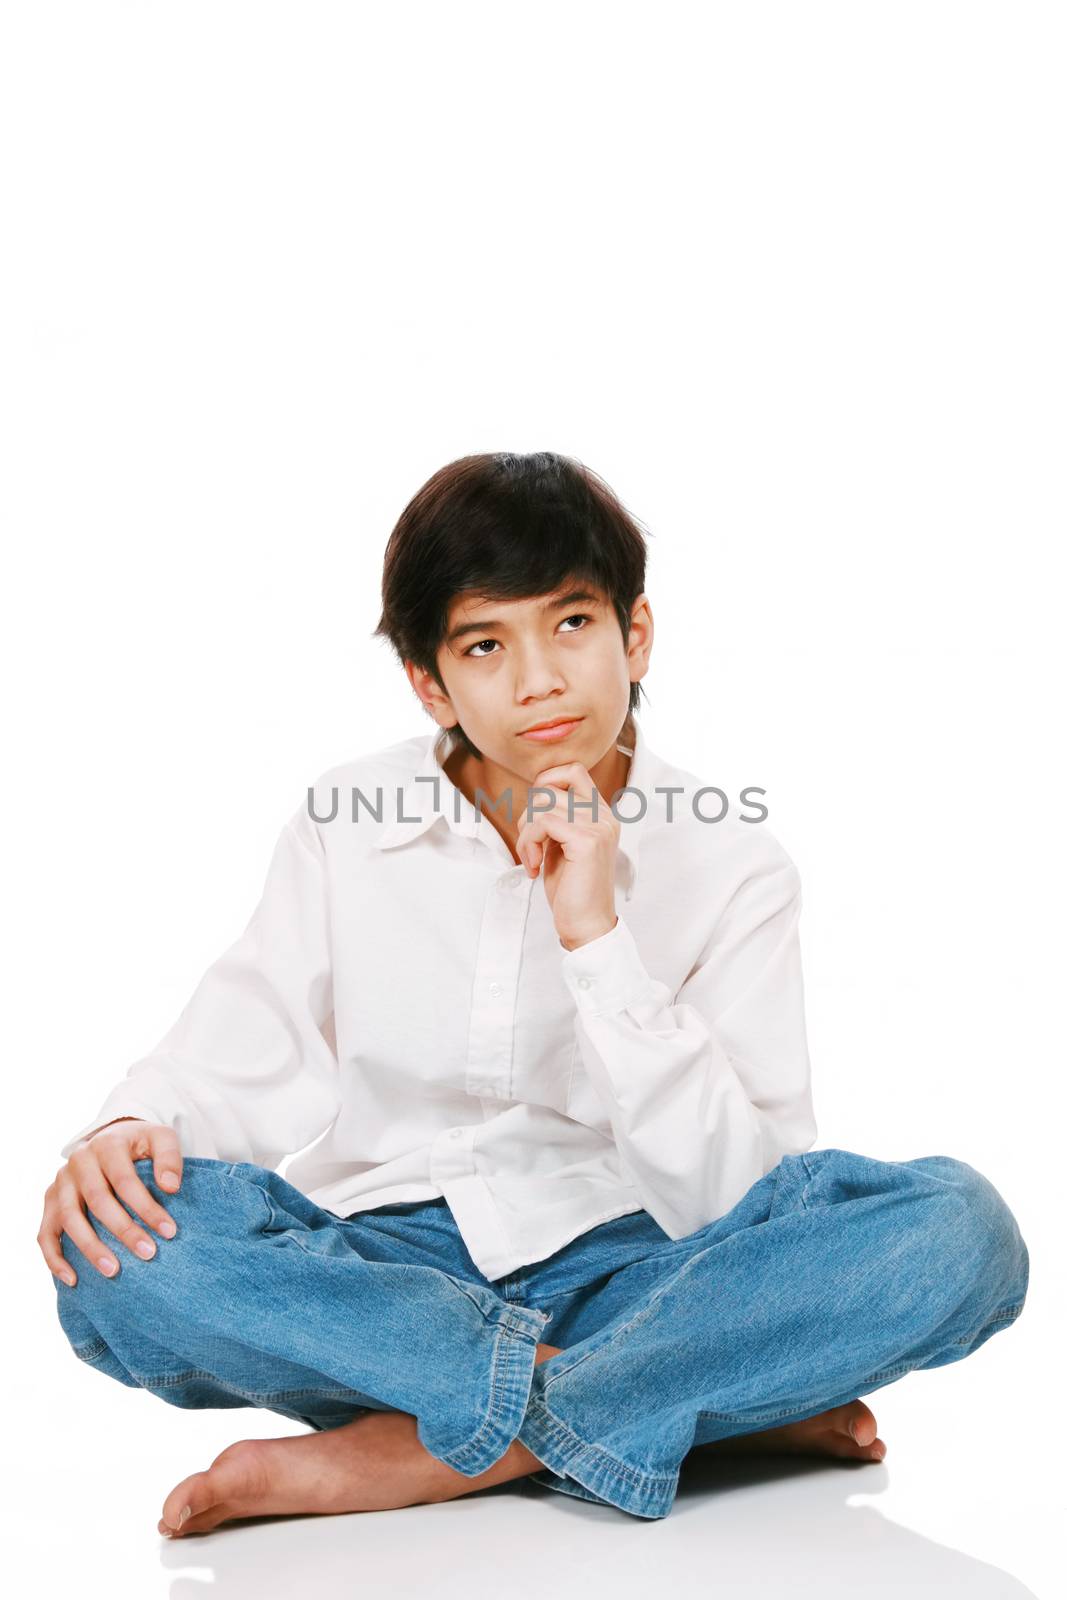 Twelve year old boy sitting, thinking with chin on hand